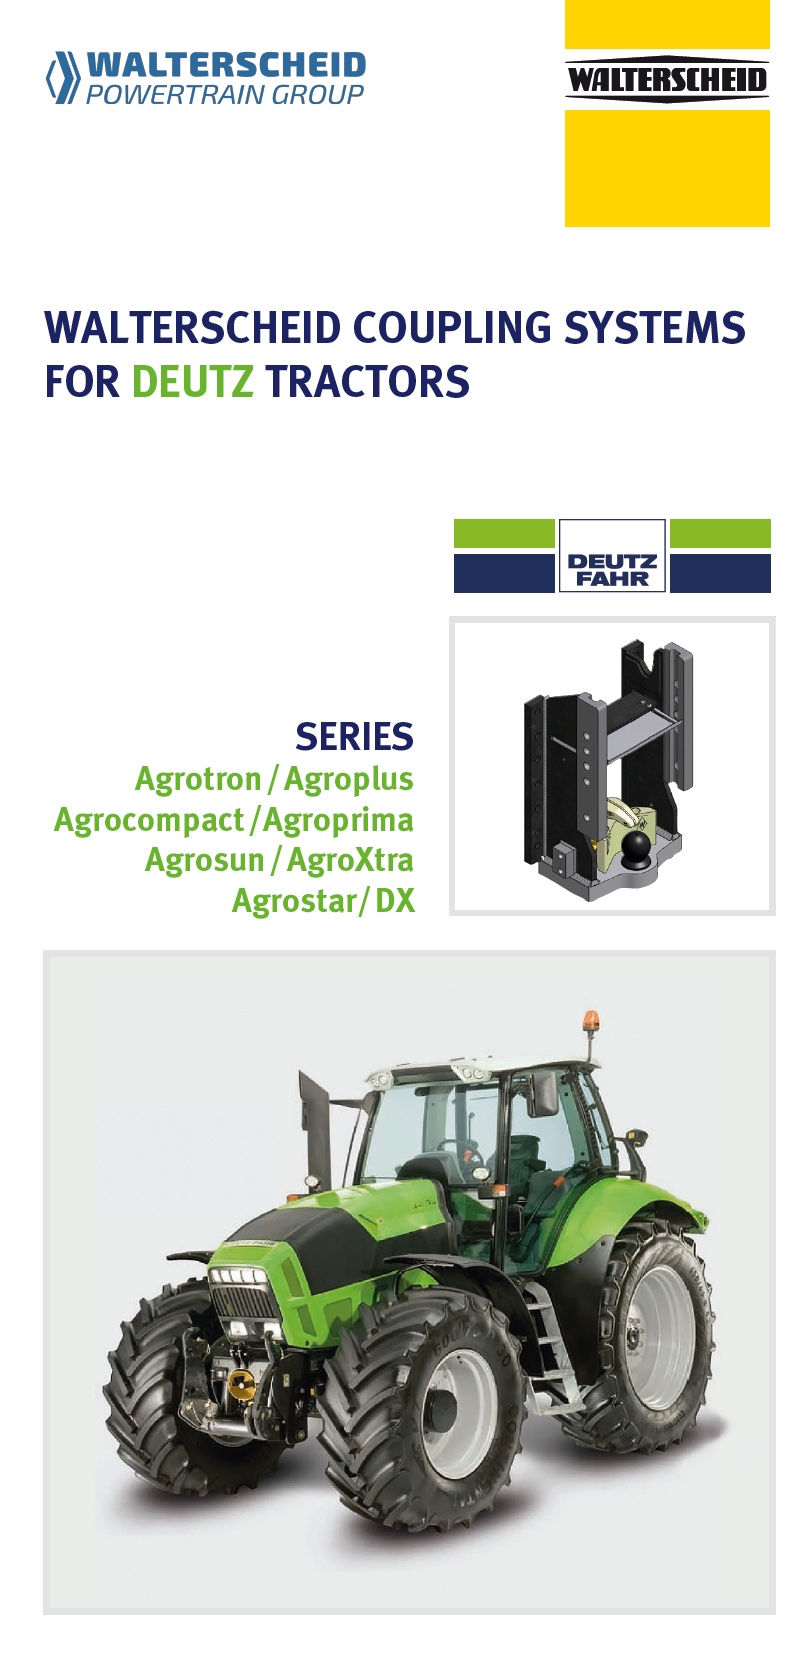 Coupling systems for Deutz tractors